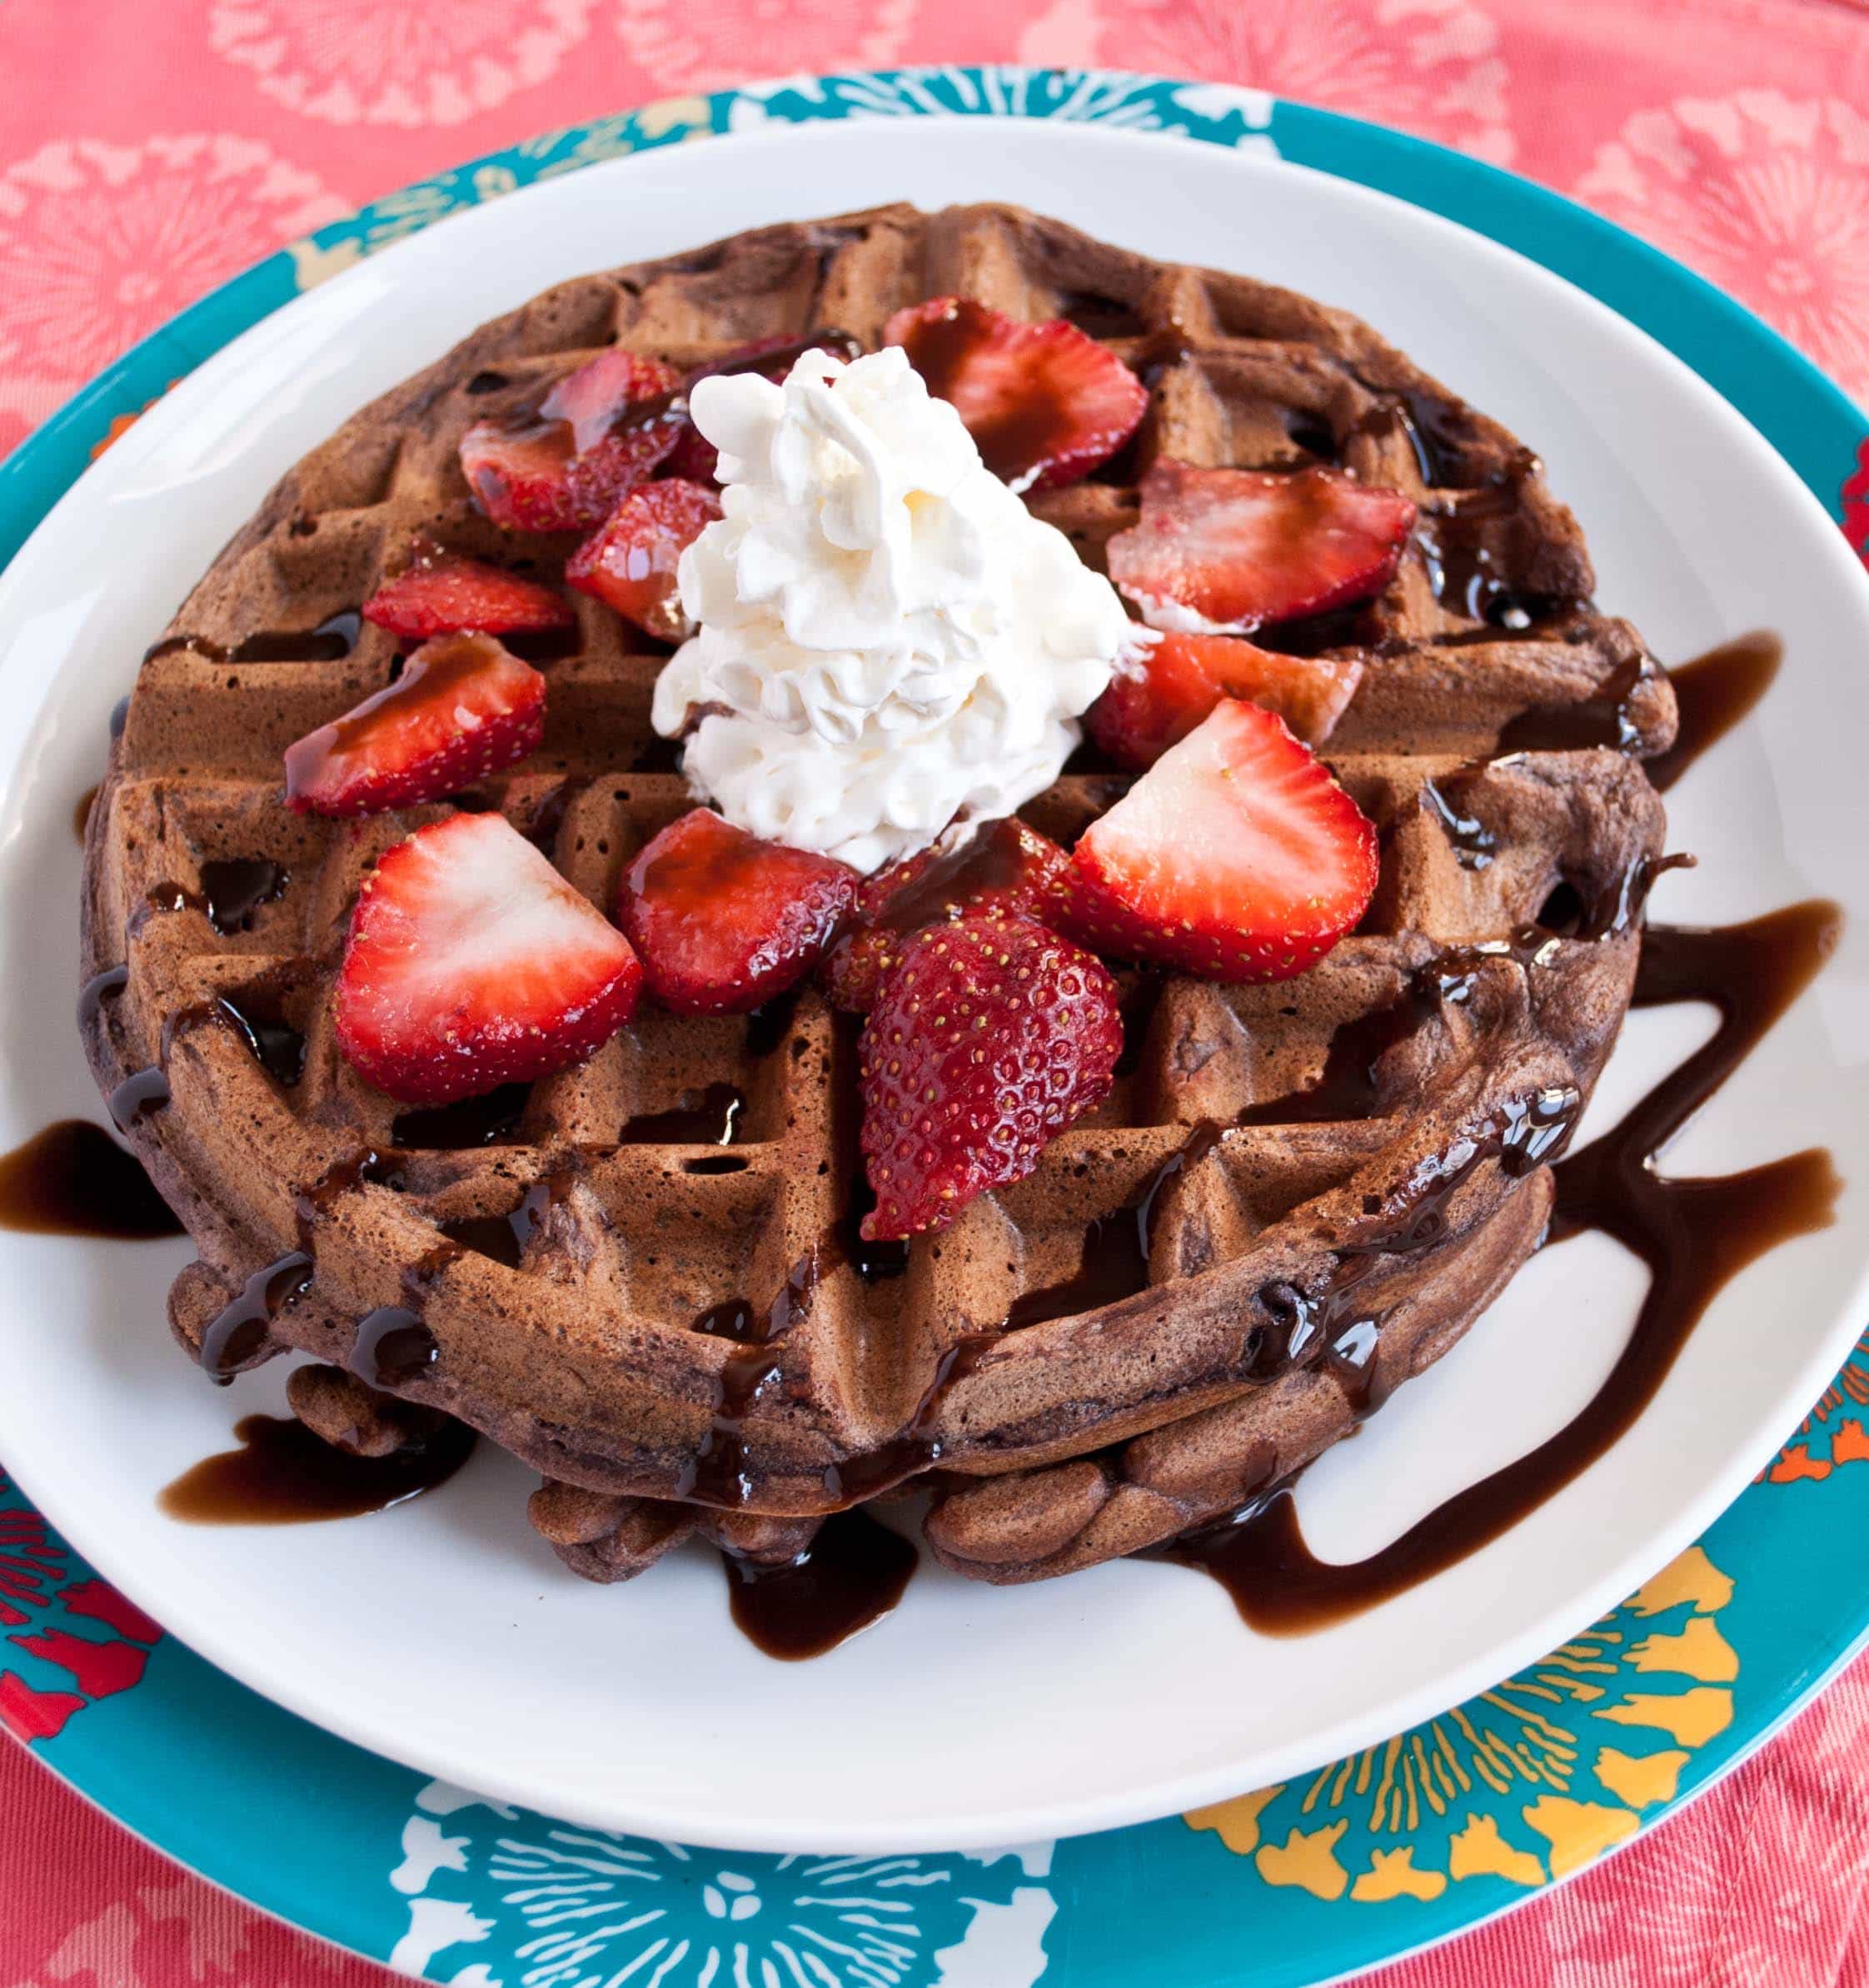 chocolate chip waffle with strawberry slices and dollop of whipped cream